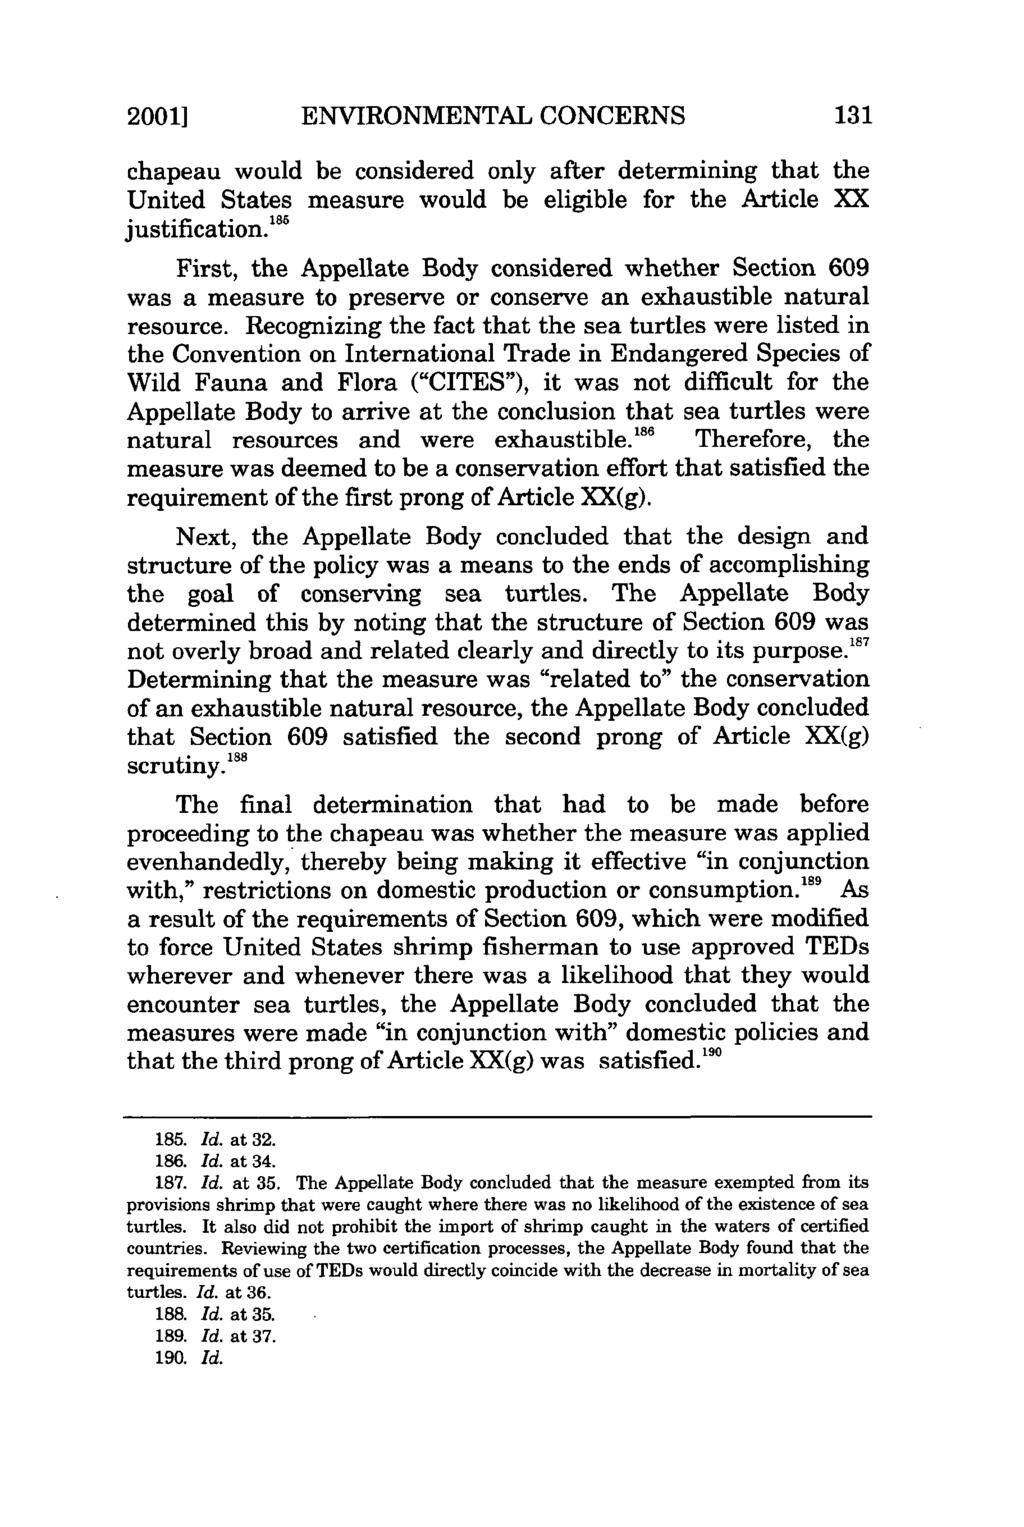 2001] ENVIRONMENTAL CONCERNS chapeau would be considered only after determining that the United States measure would be eligible for the Article XX justification.